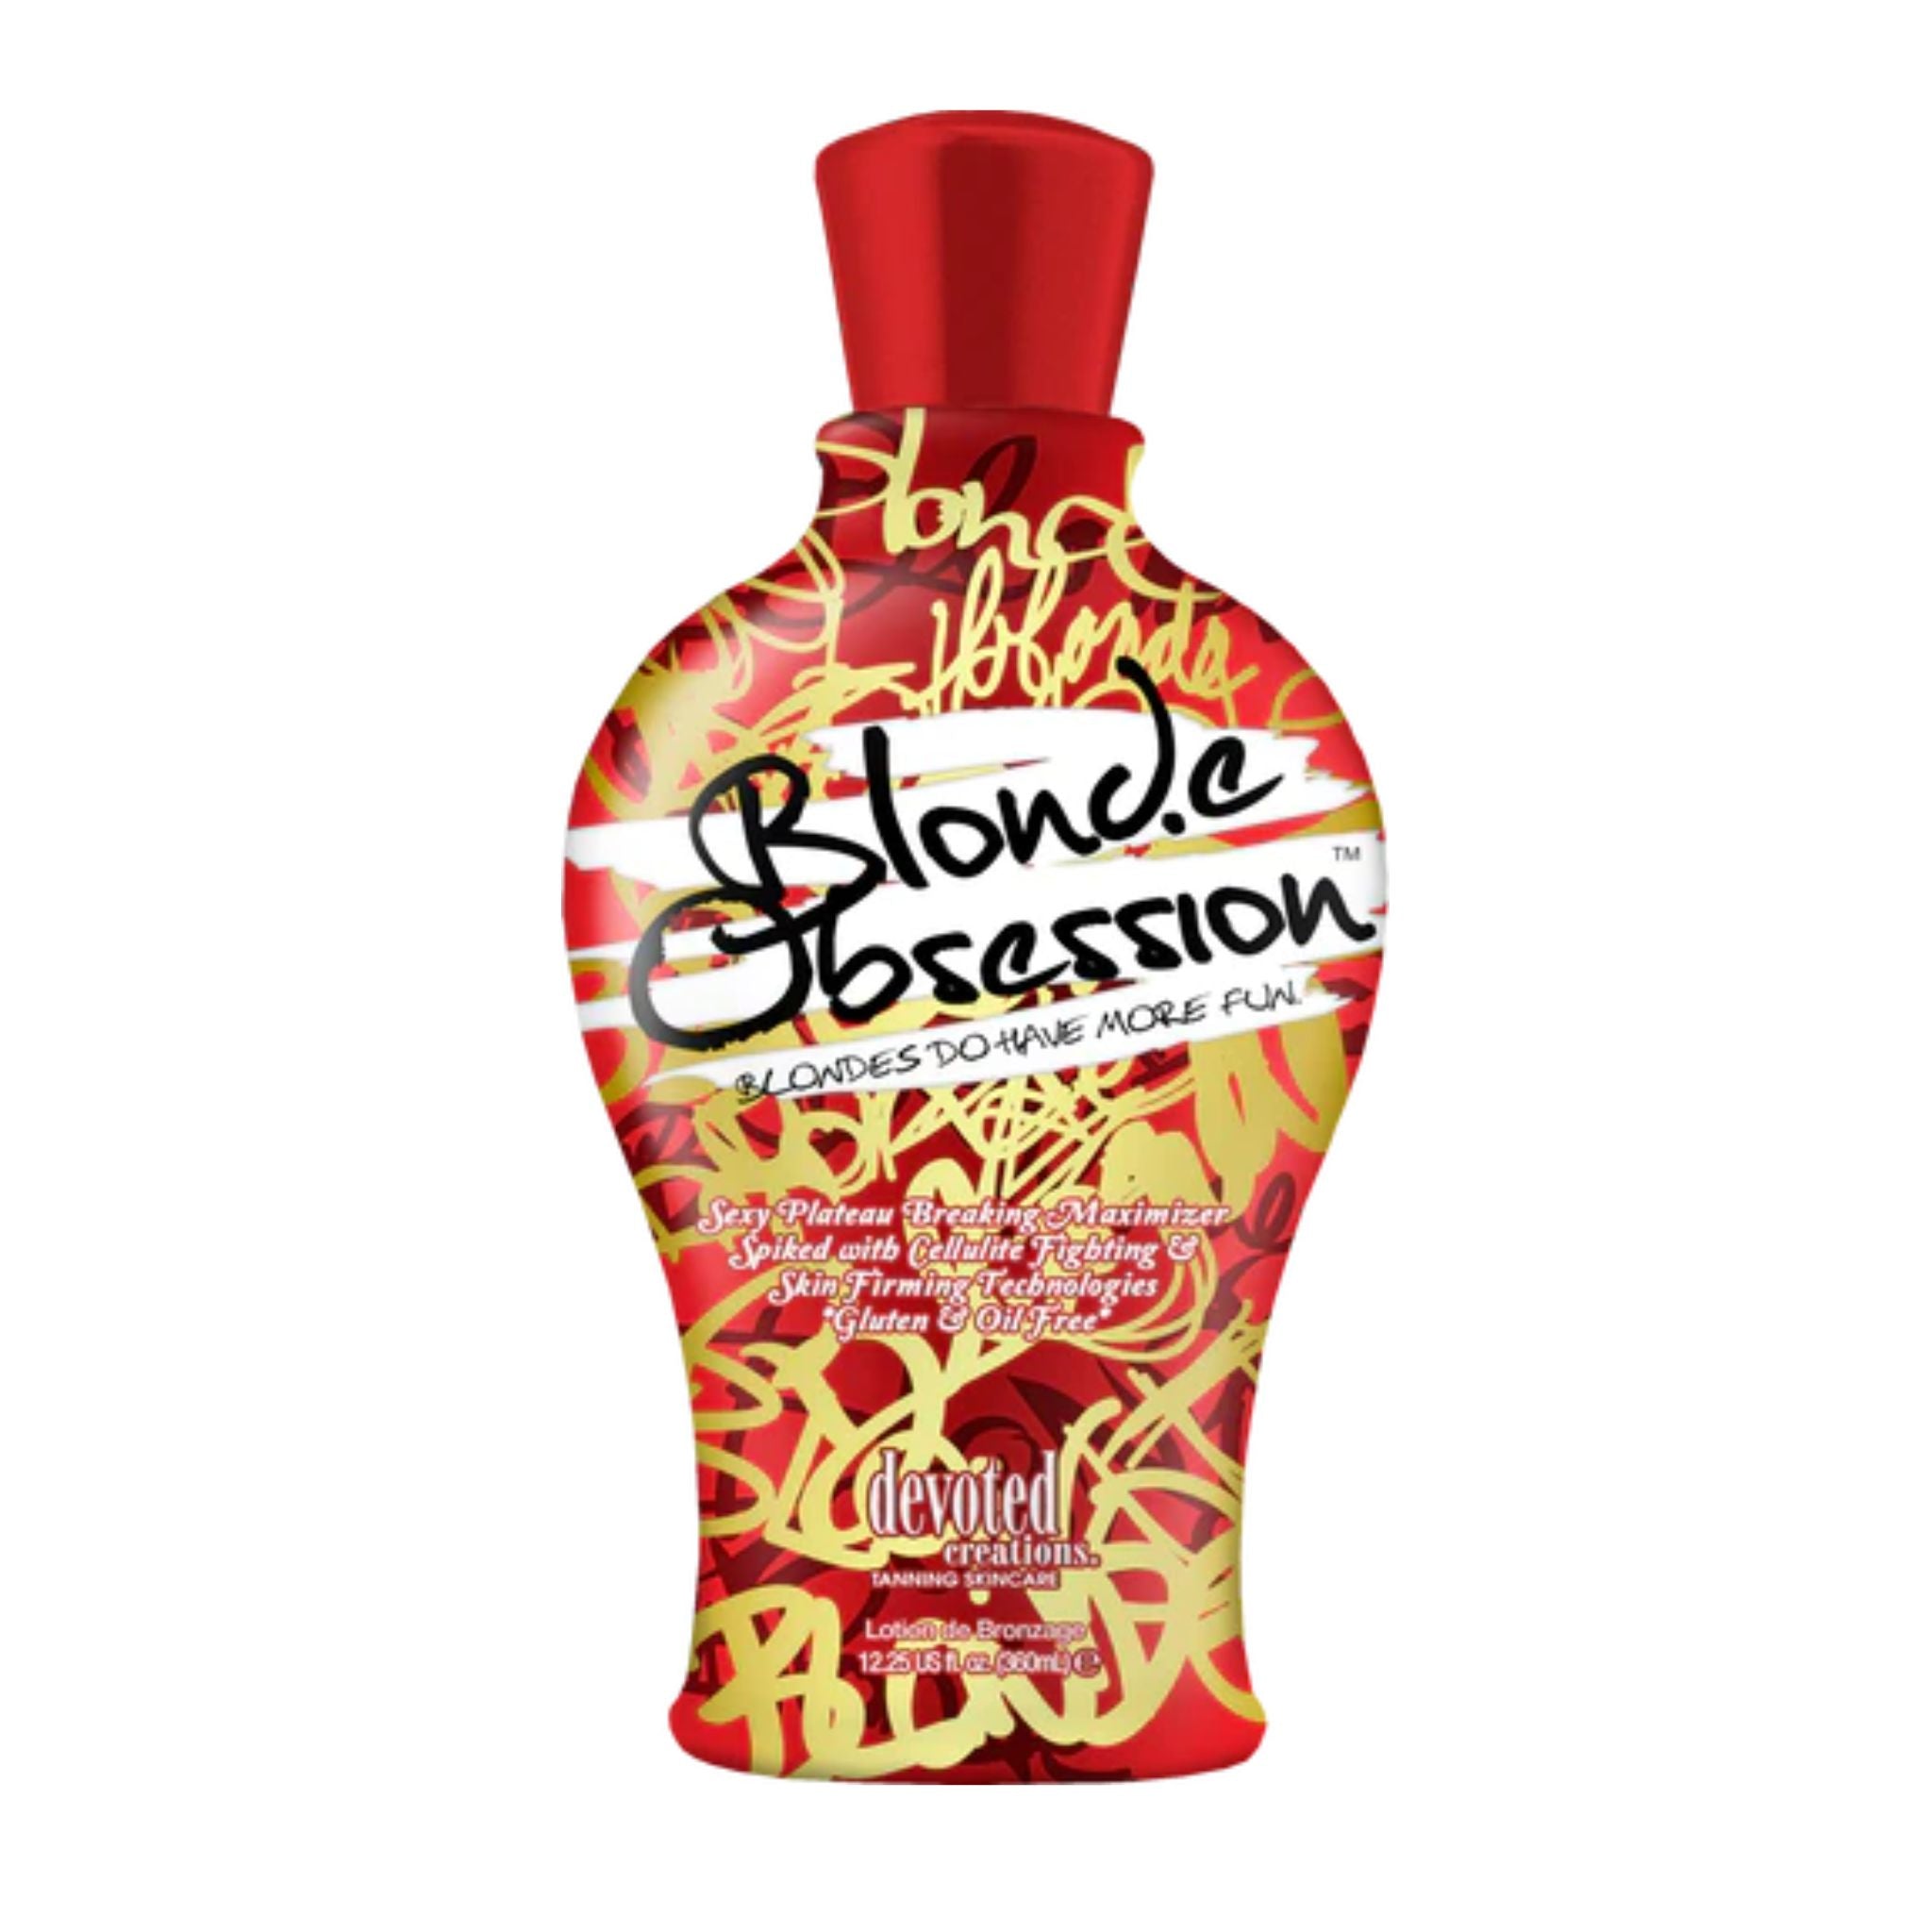 Devoted Creations Blonde Obsession Tanning Lotion Tanning Lotion